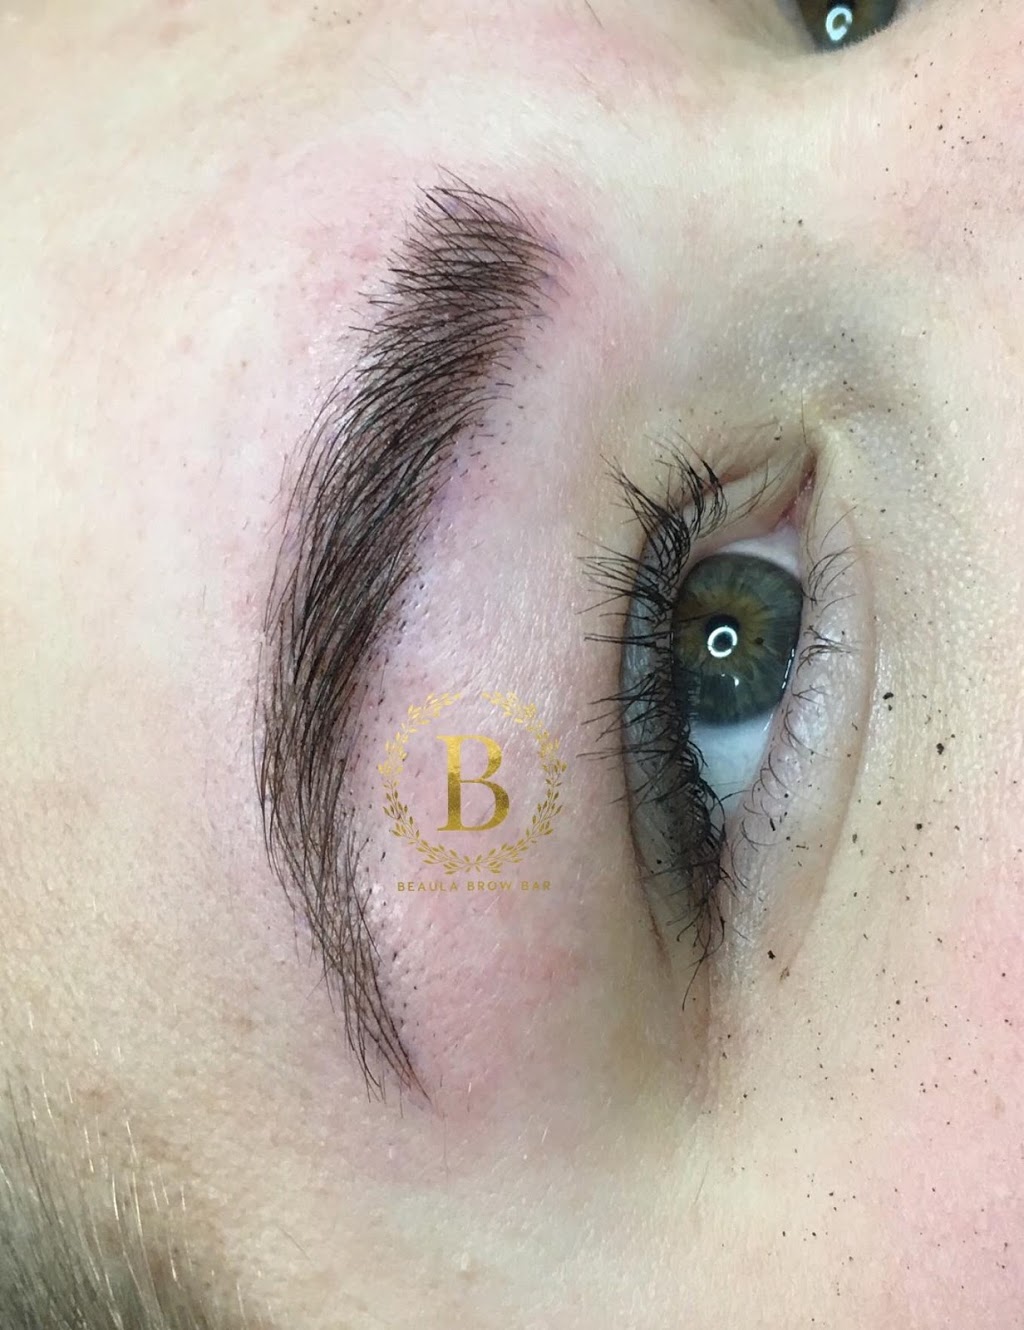 BEAULA - Microblading & Training | point of interest | 3695 Reynolds Rd, Nanaimo, BC V9T 0J4, Canada | 2506194113 OR +1 250-619-4113